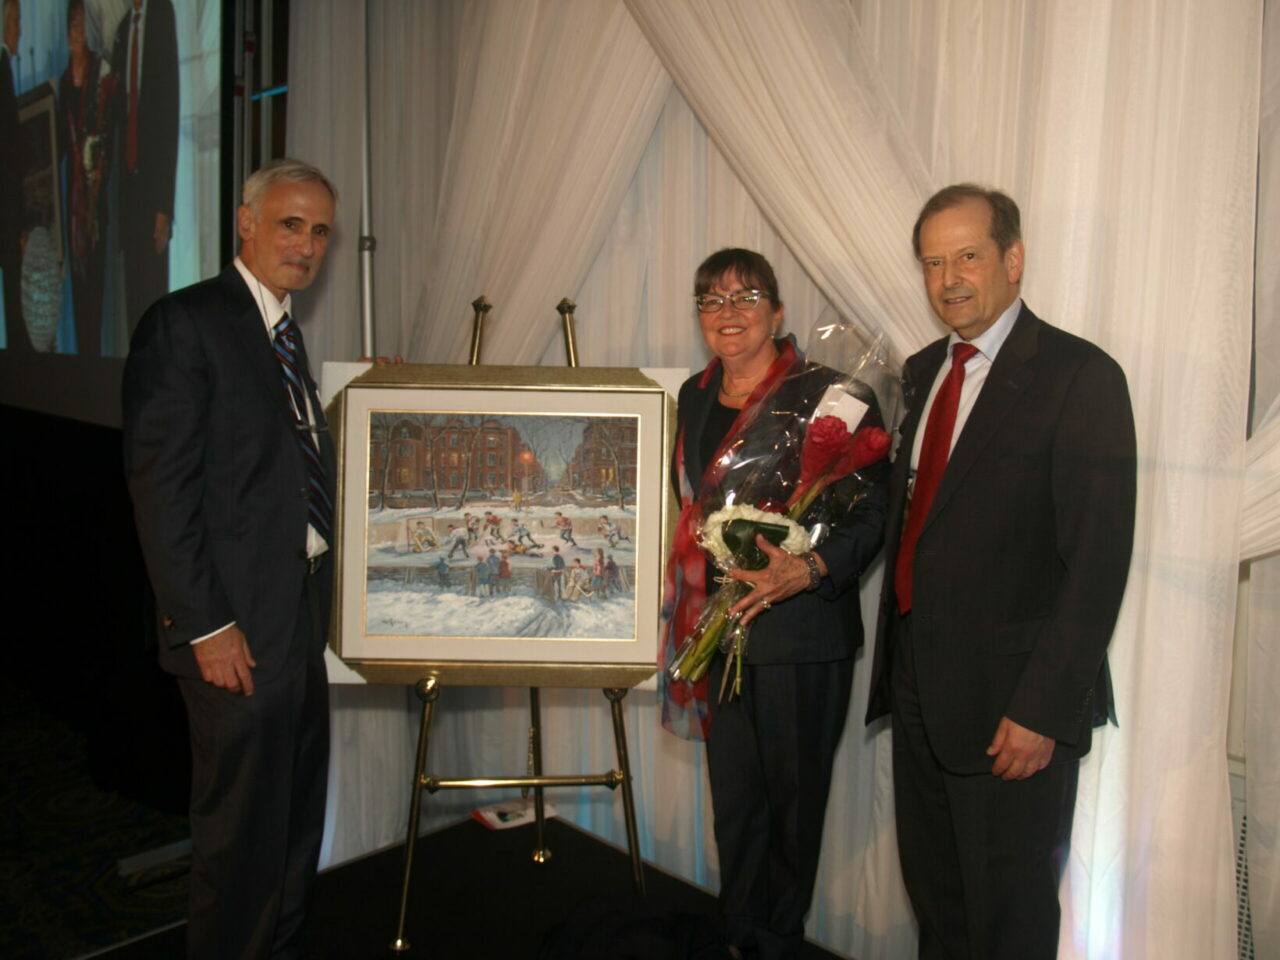 Michael Farber and wife, Danielle Farber-Tetrault being presented with a Ravery painting by Dr. Frenkiel (Photo: Jack Gurevitch)